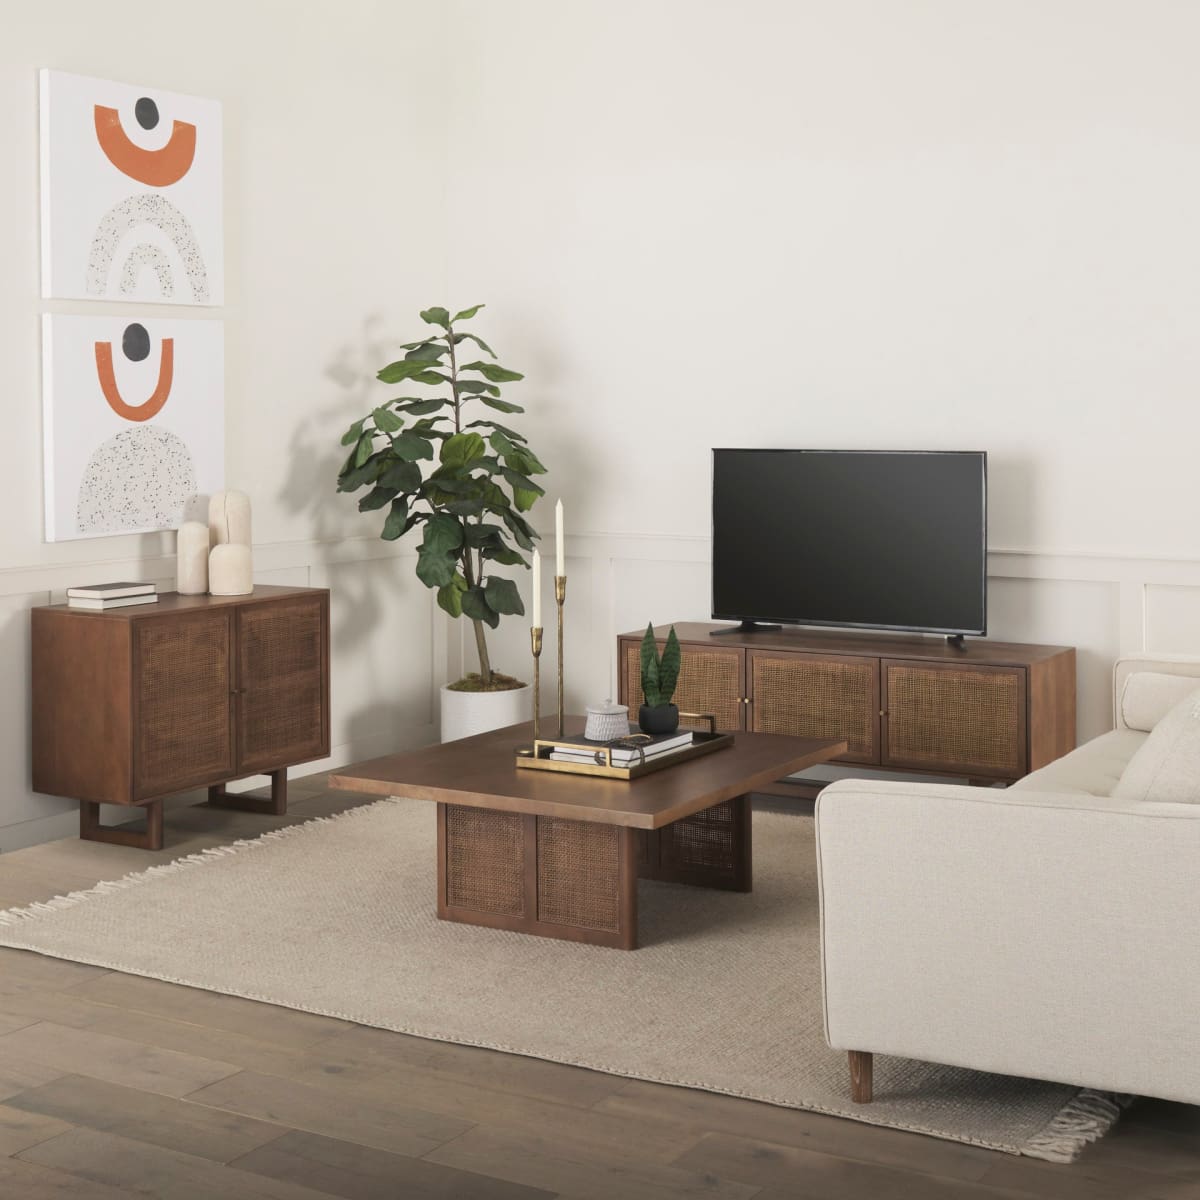 Grier Accent Cabinet Medium Brown Wood | Cane Accent | 2 Door - acc-chest-cabinets